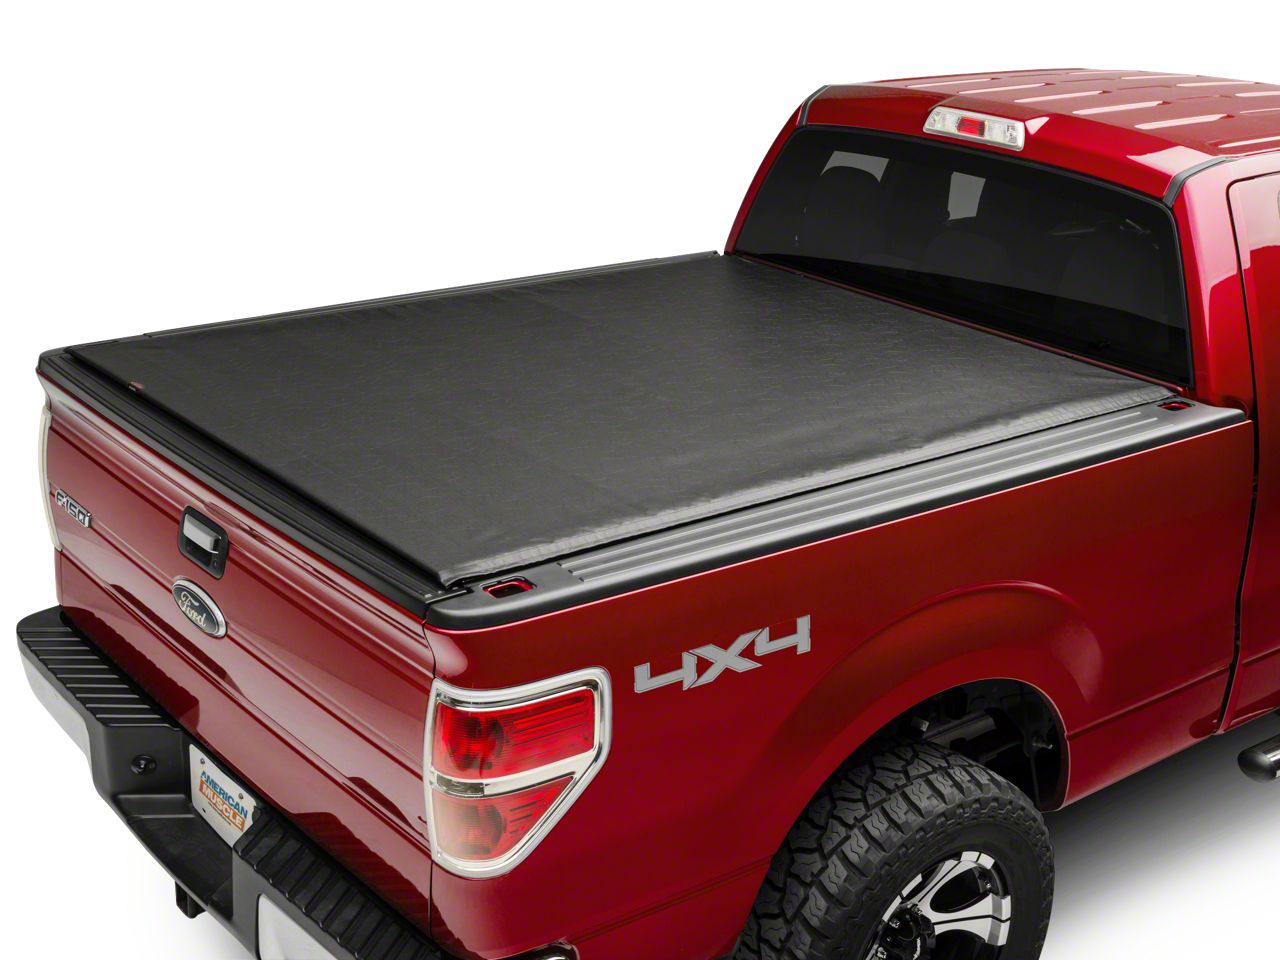 F150 Bed Covers & Tonneau Covers 1997-2003